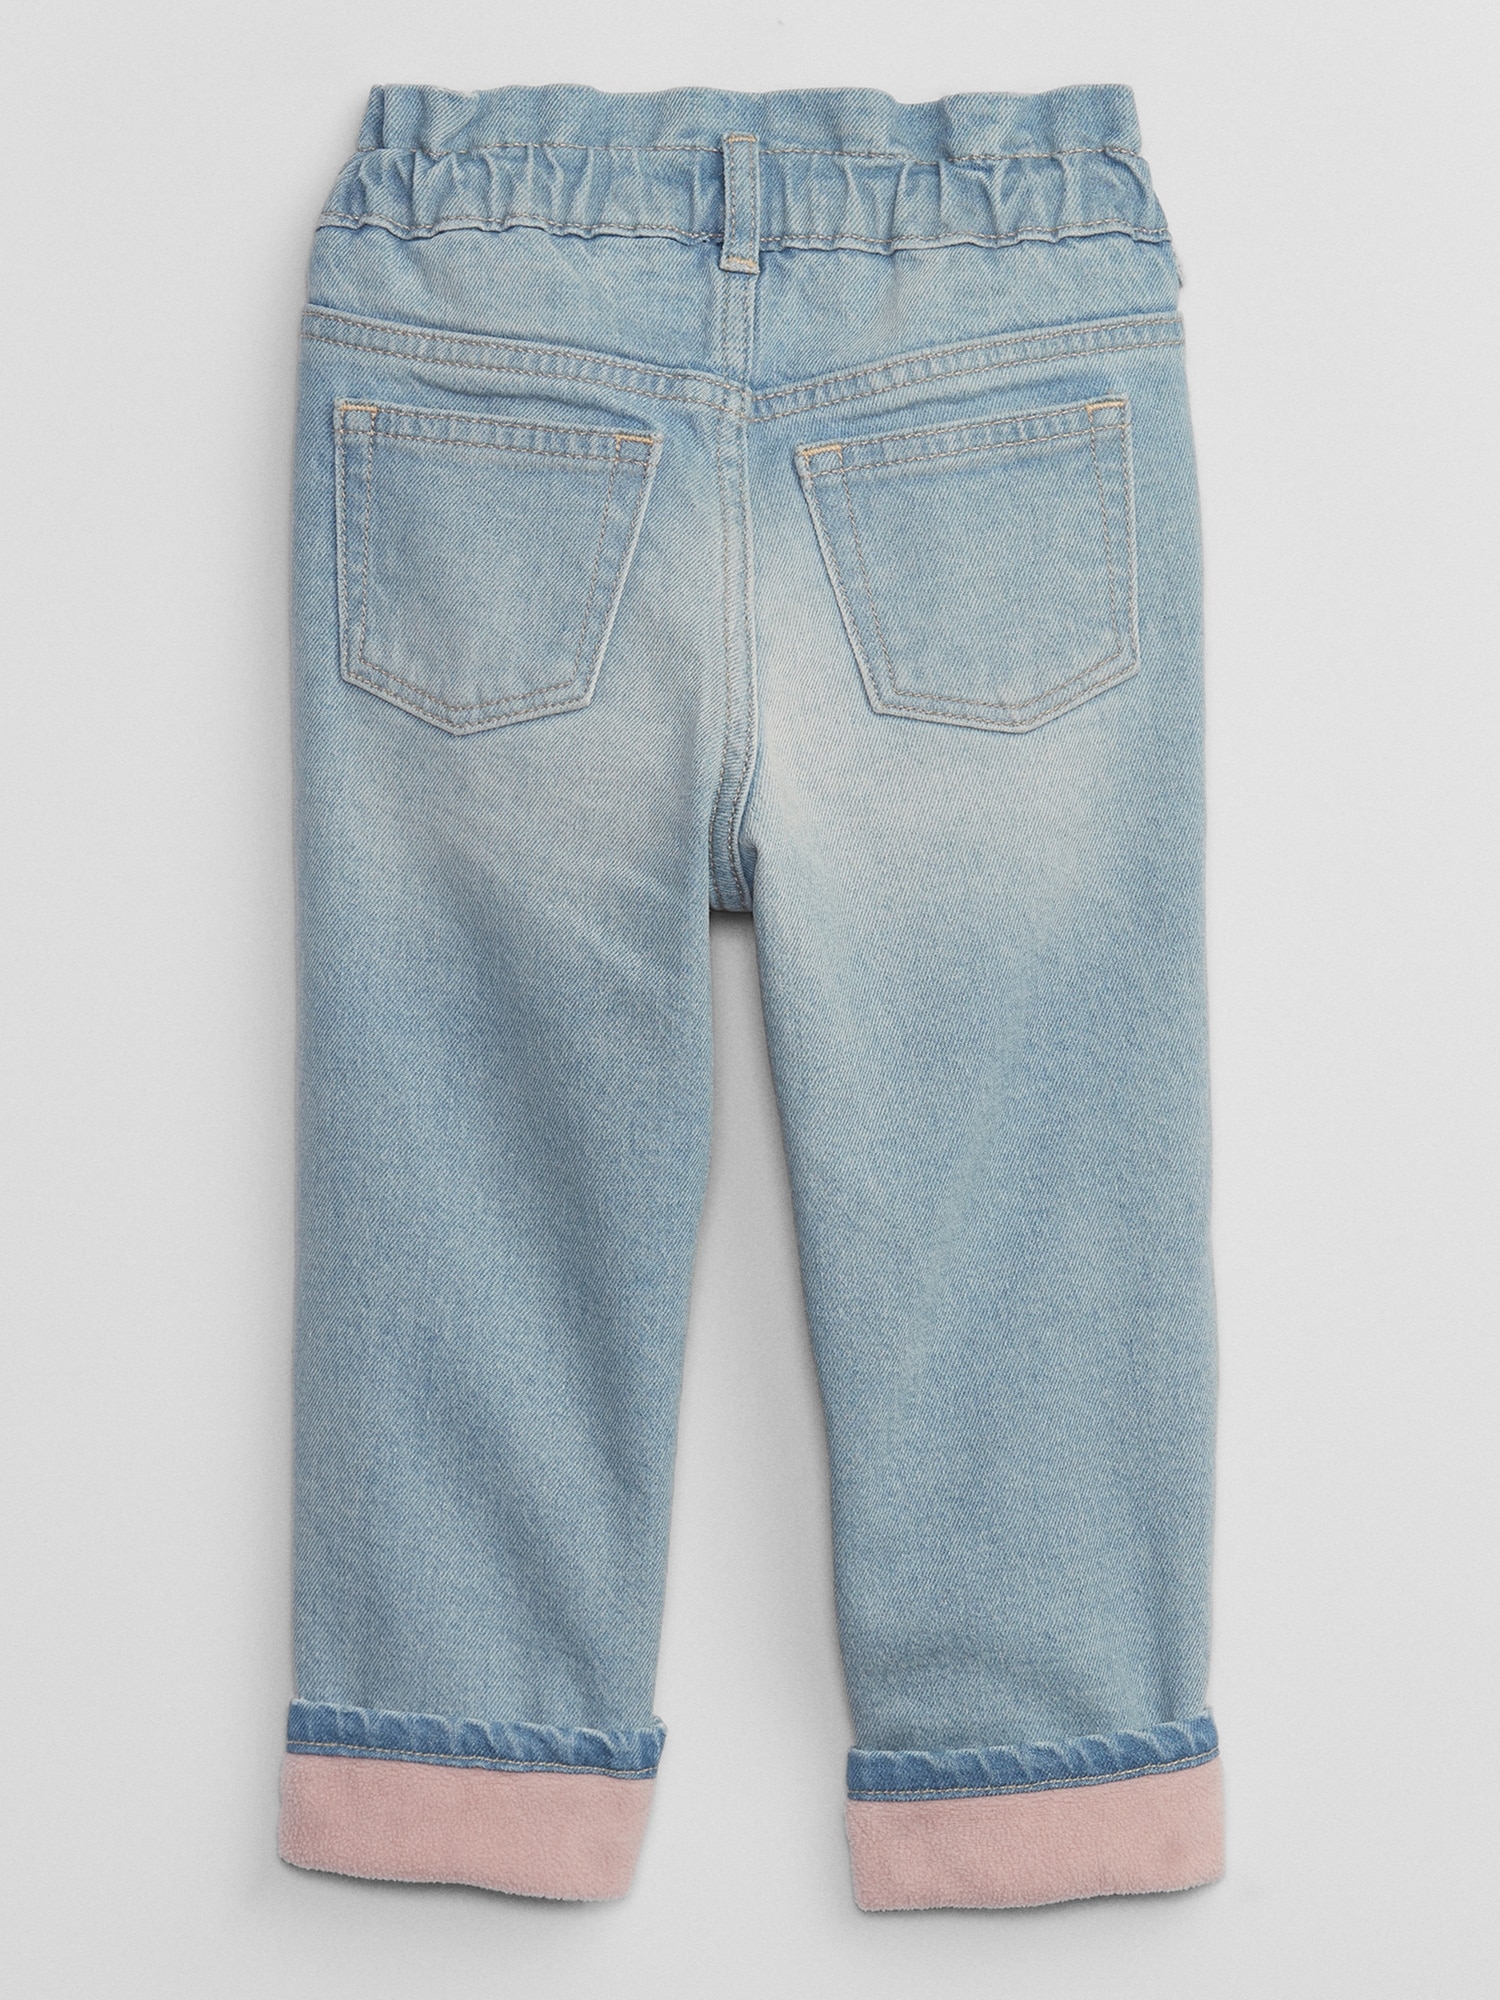 babyGap Cozy-Lined Paperbag Mom Jeans with Washwell | Gap Factory